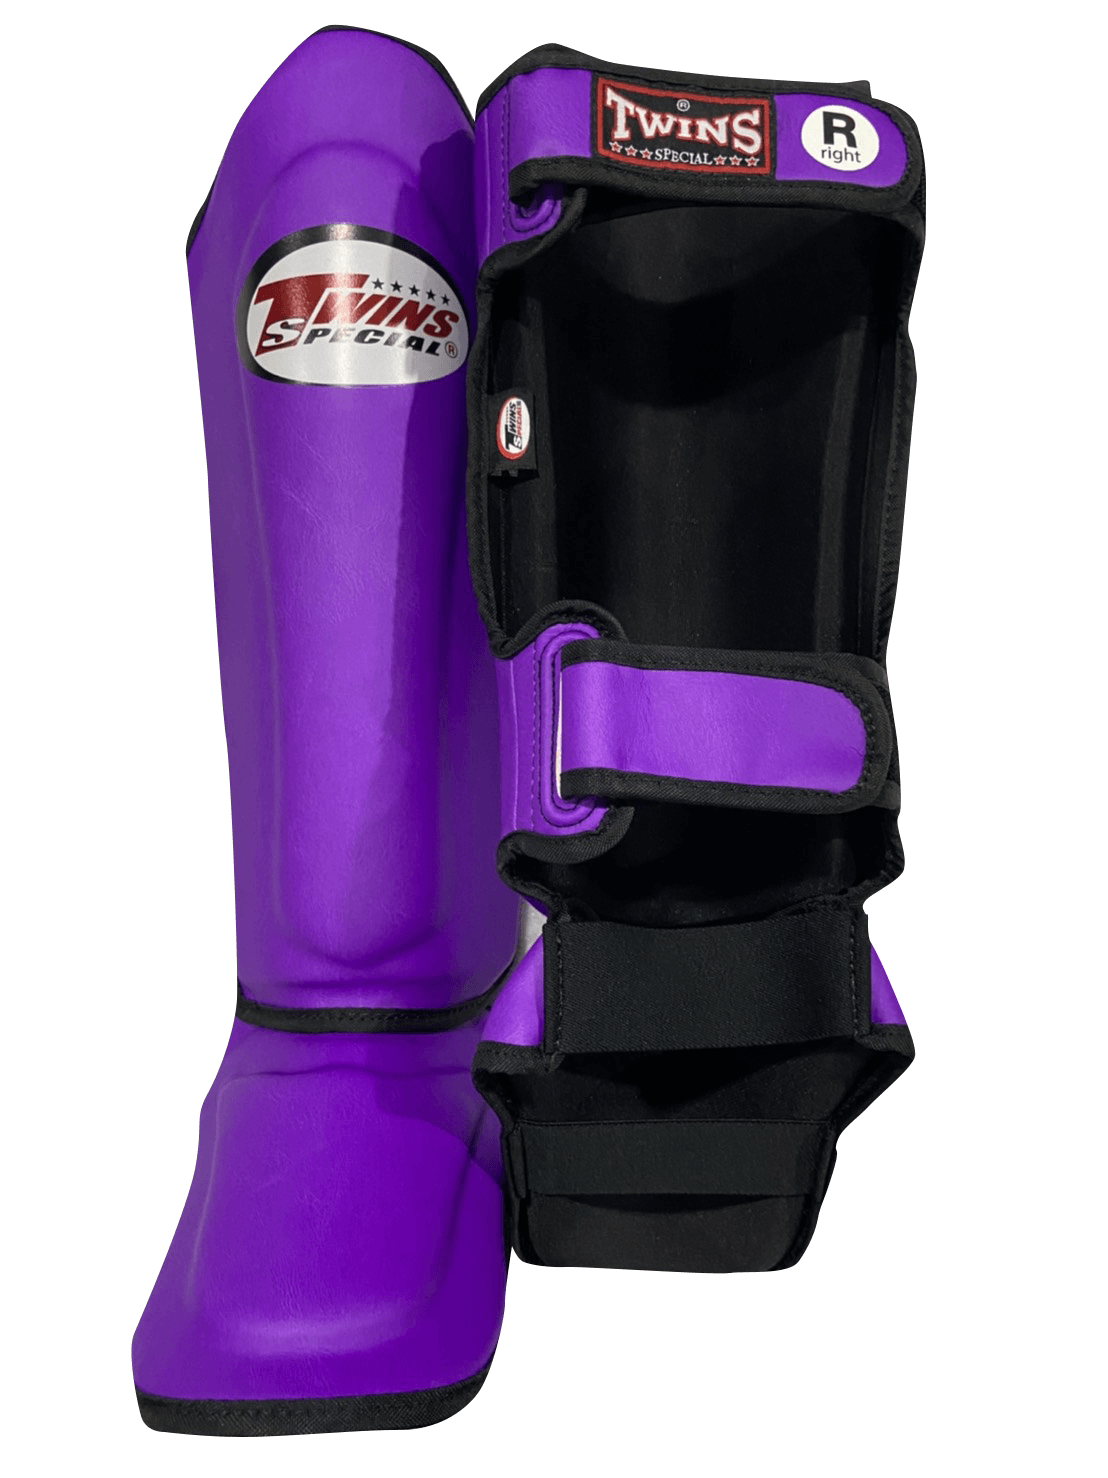 Twins Special Shinguards SGS10 Purple Twins Special